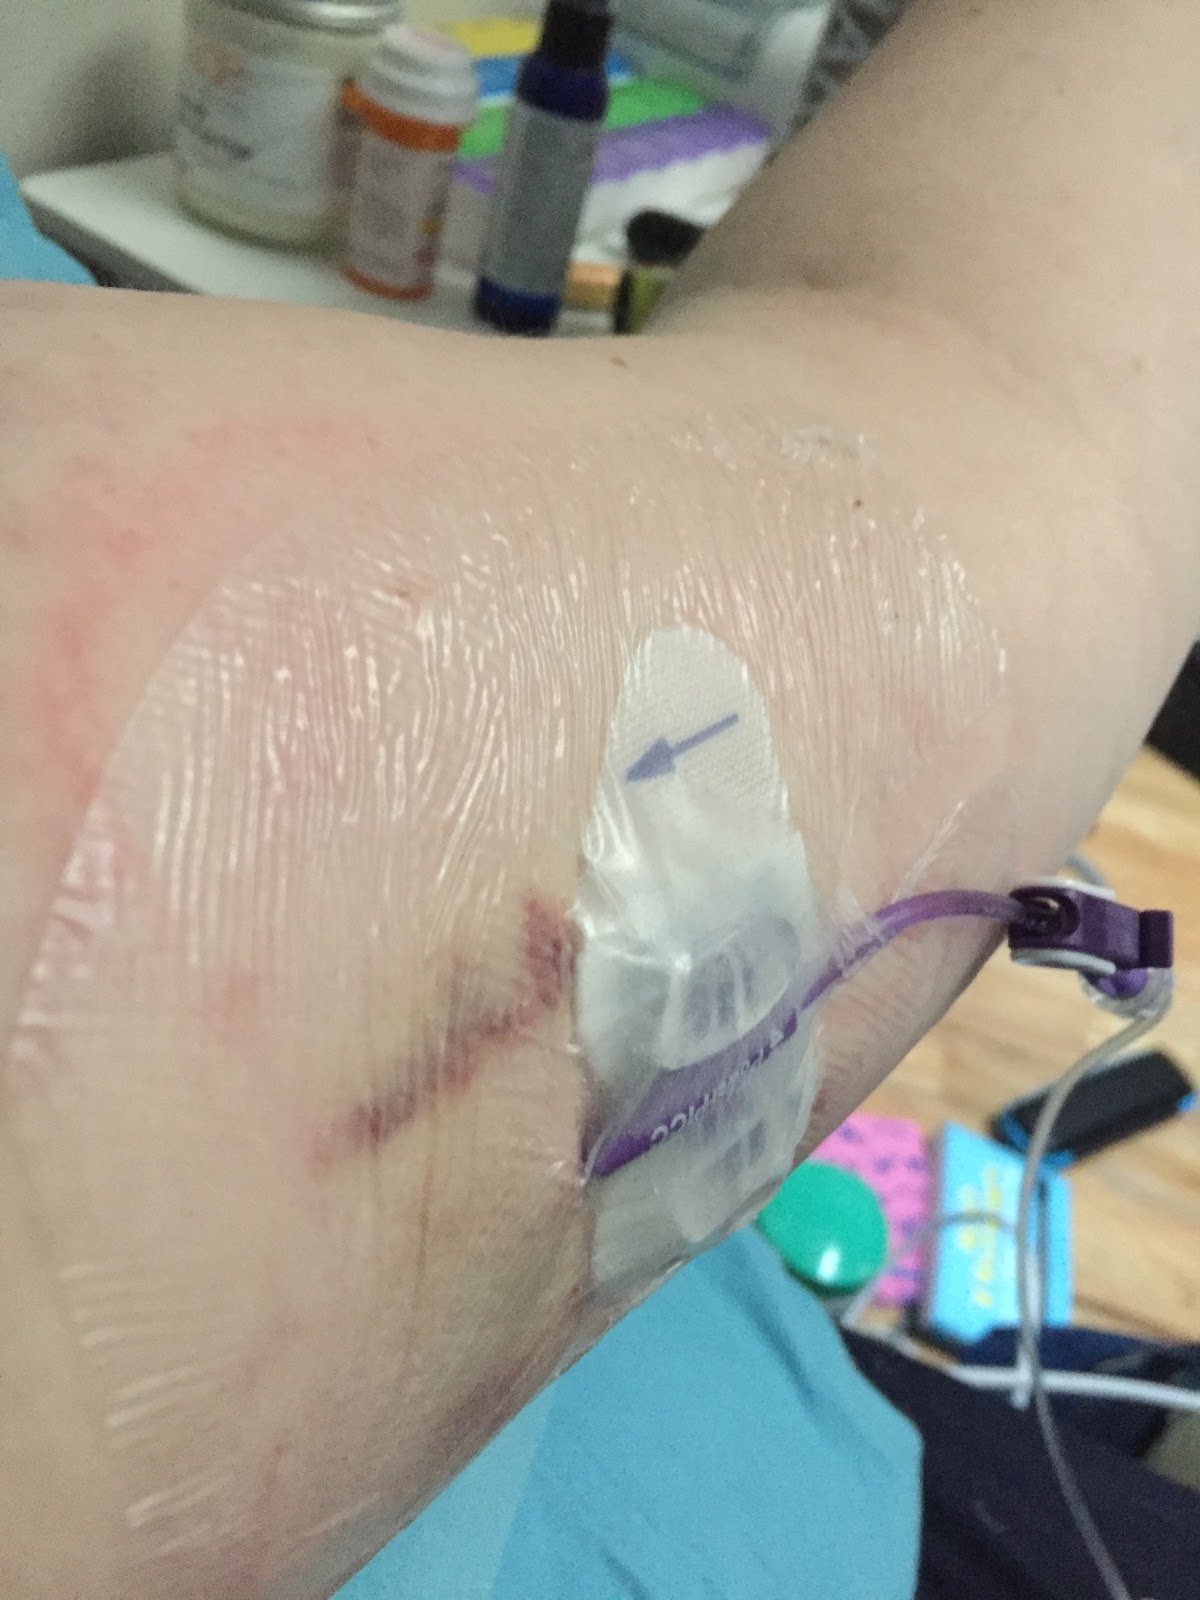 PICC line in arm